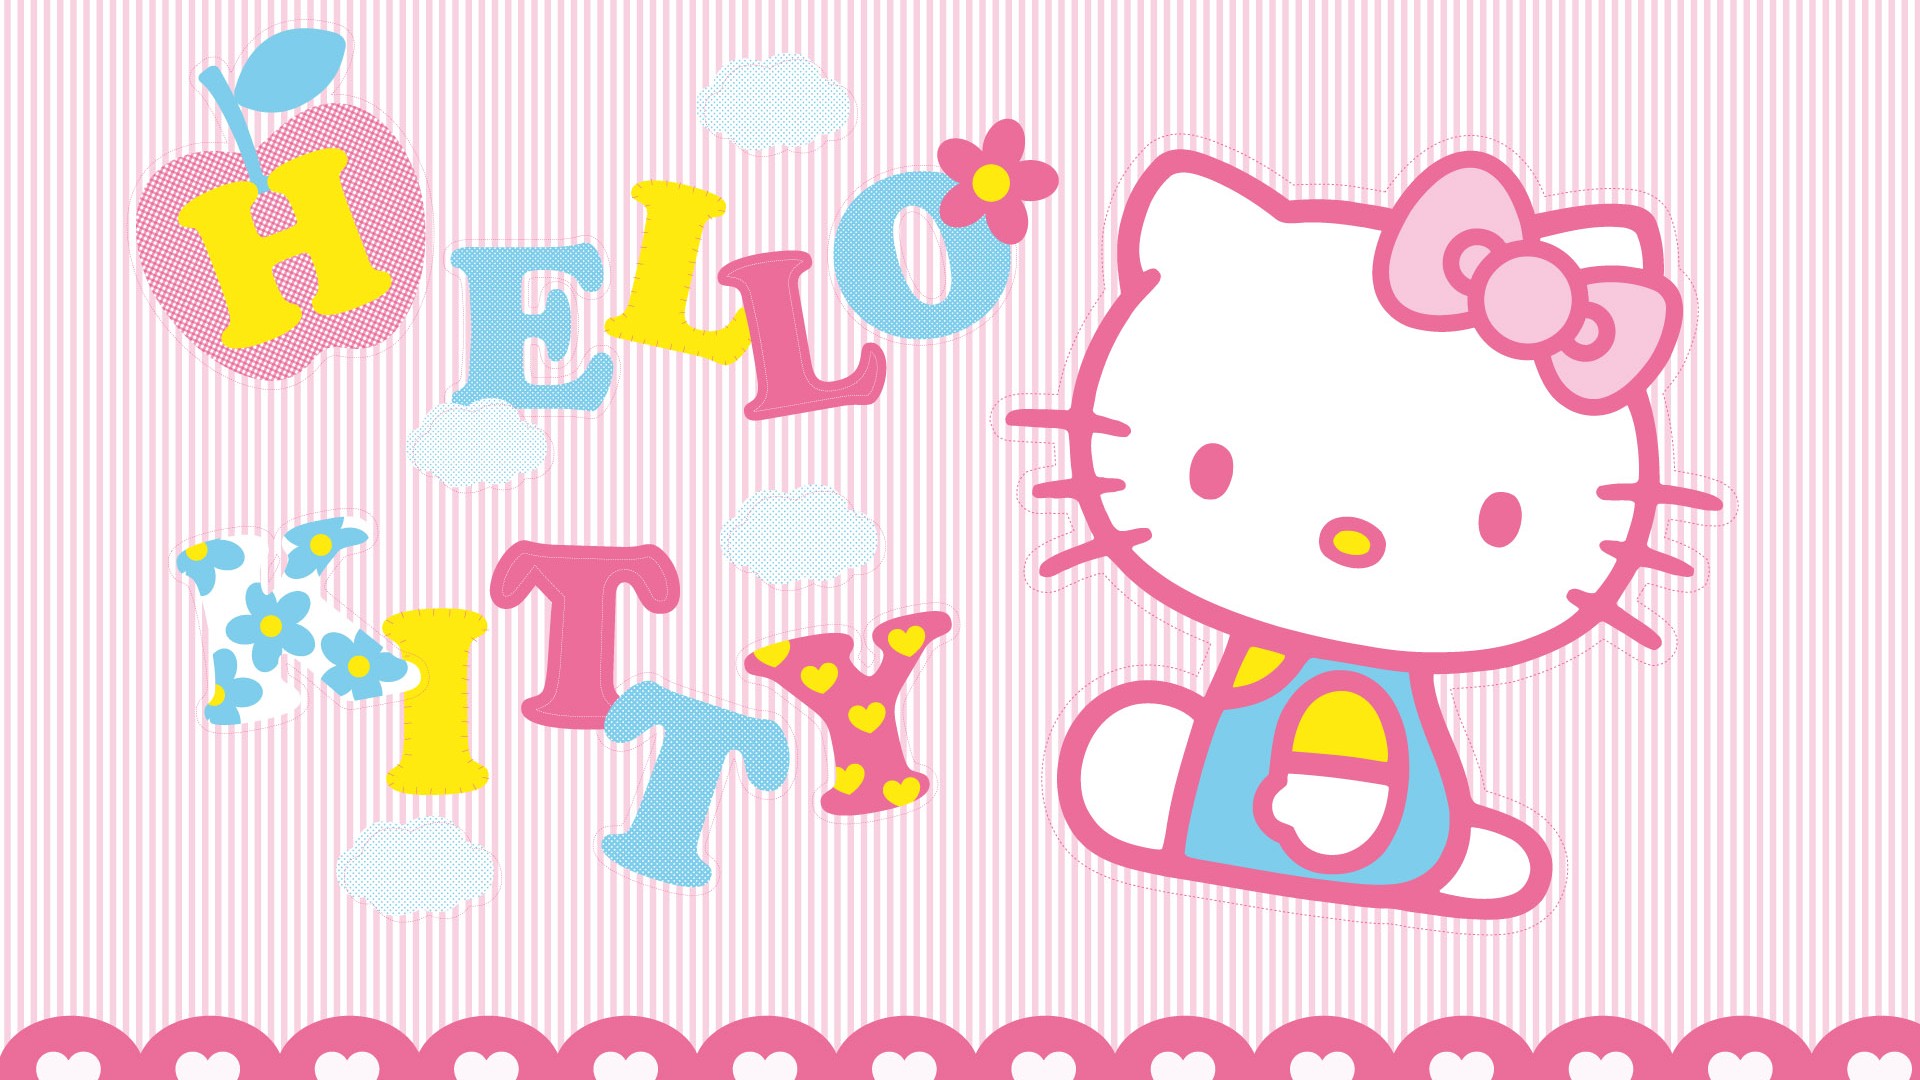 Hello Kitty Characters Desktop Backgrounds With Resolution 1920X1080 pixel. You can make this wallpaper for your Desktop Computer Backgrounds, Mac Wallpapers, Android Lock screen or iPhone Screensavers